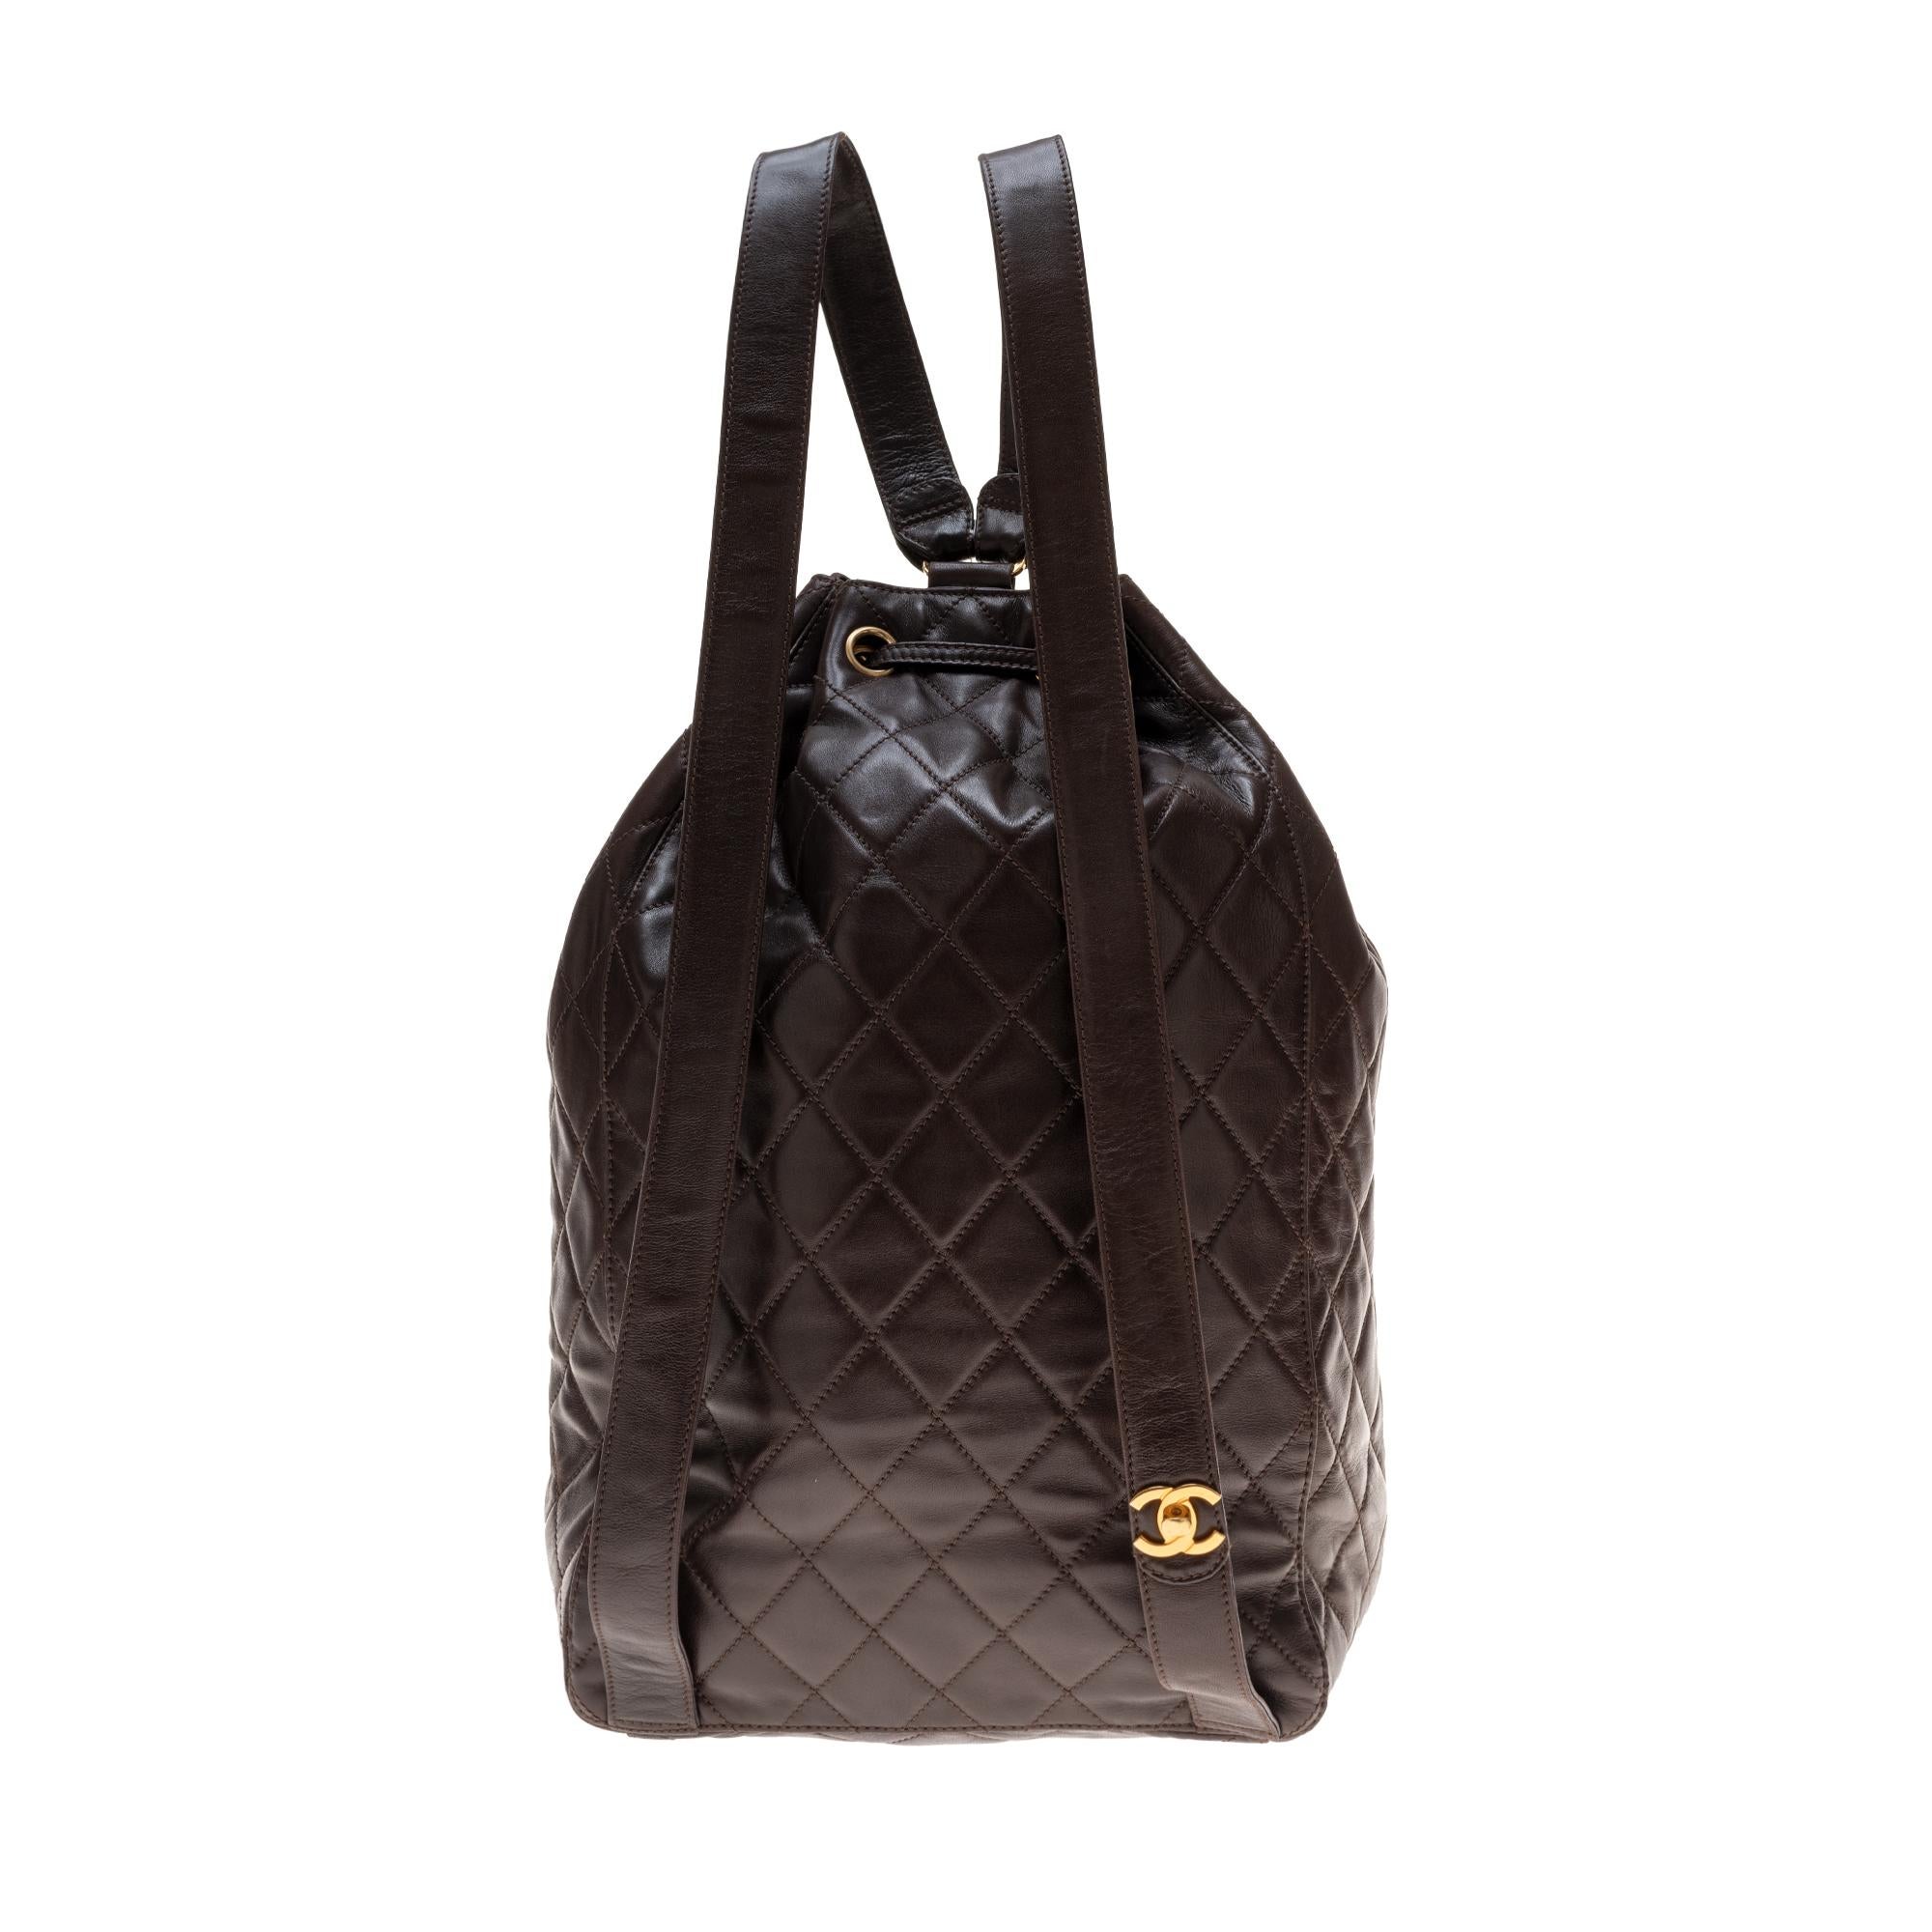 Beautiful Chanel backpack in the shape of a brown quilted lambskin purse, lace closure, beige fabric interior, 2 zipped pockets.
Special Chanel gift for their VIP clients.
Dimensions: 43 * 30 * 17
Back strap length: 80cm
Very good general condition